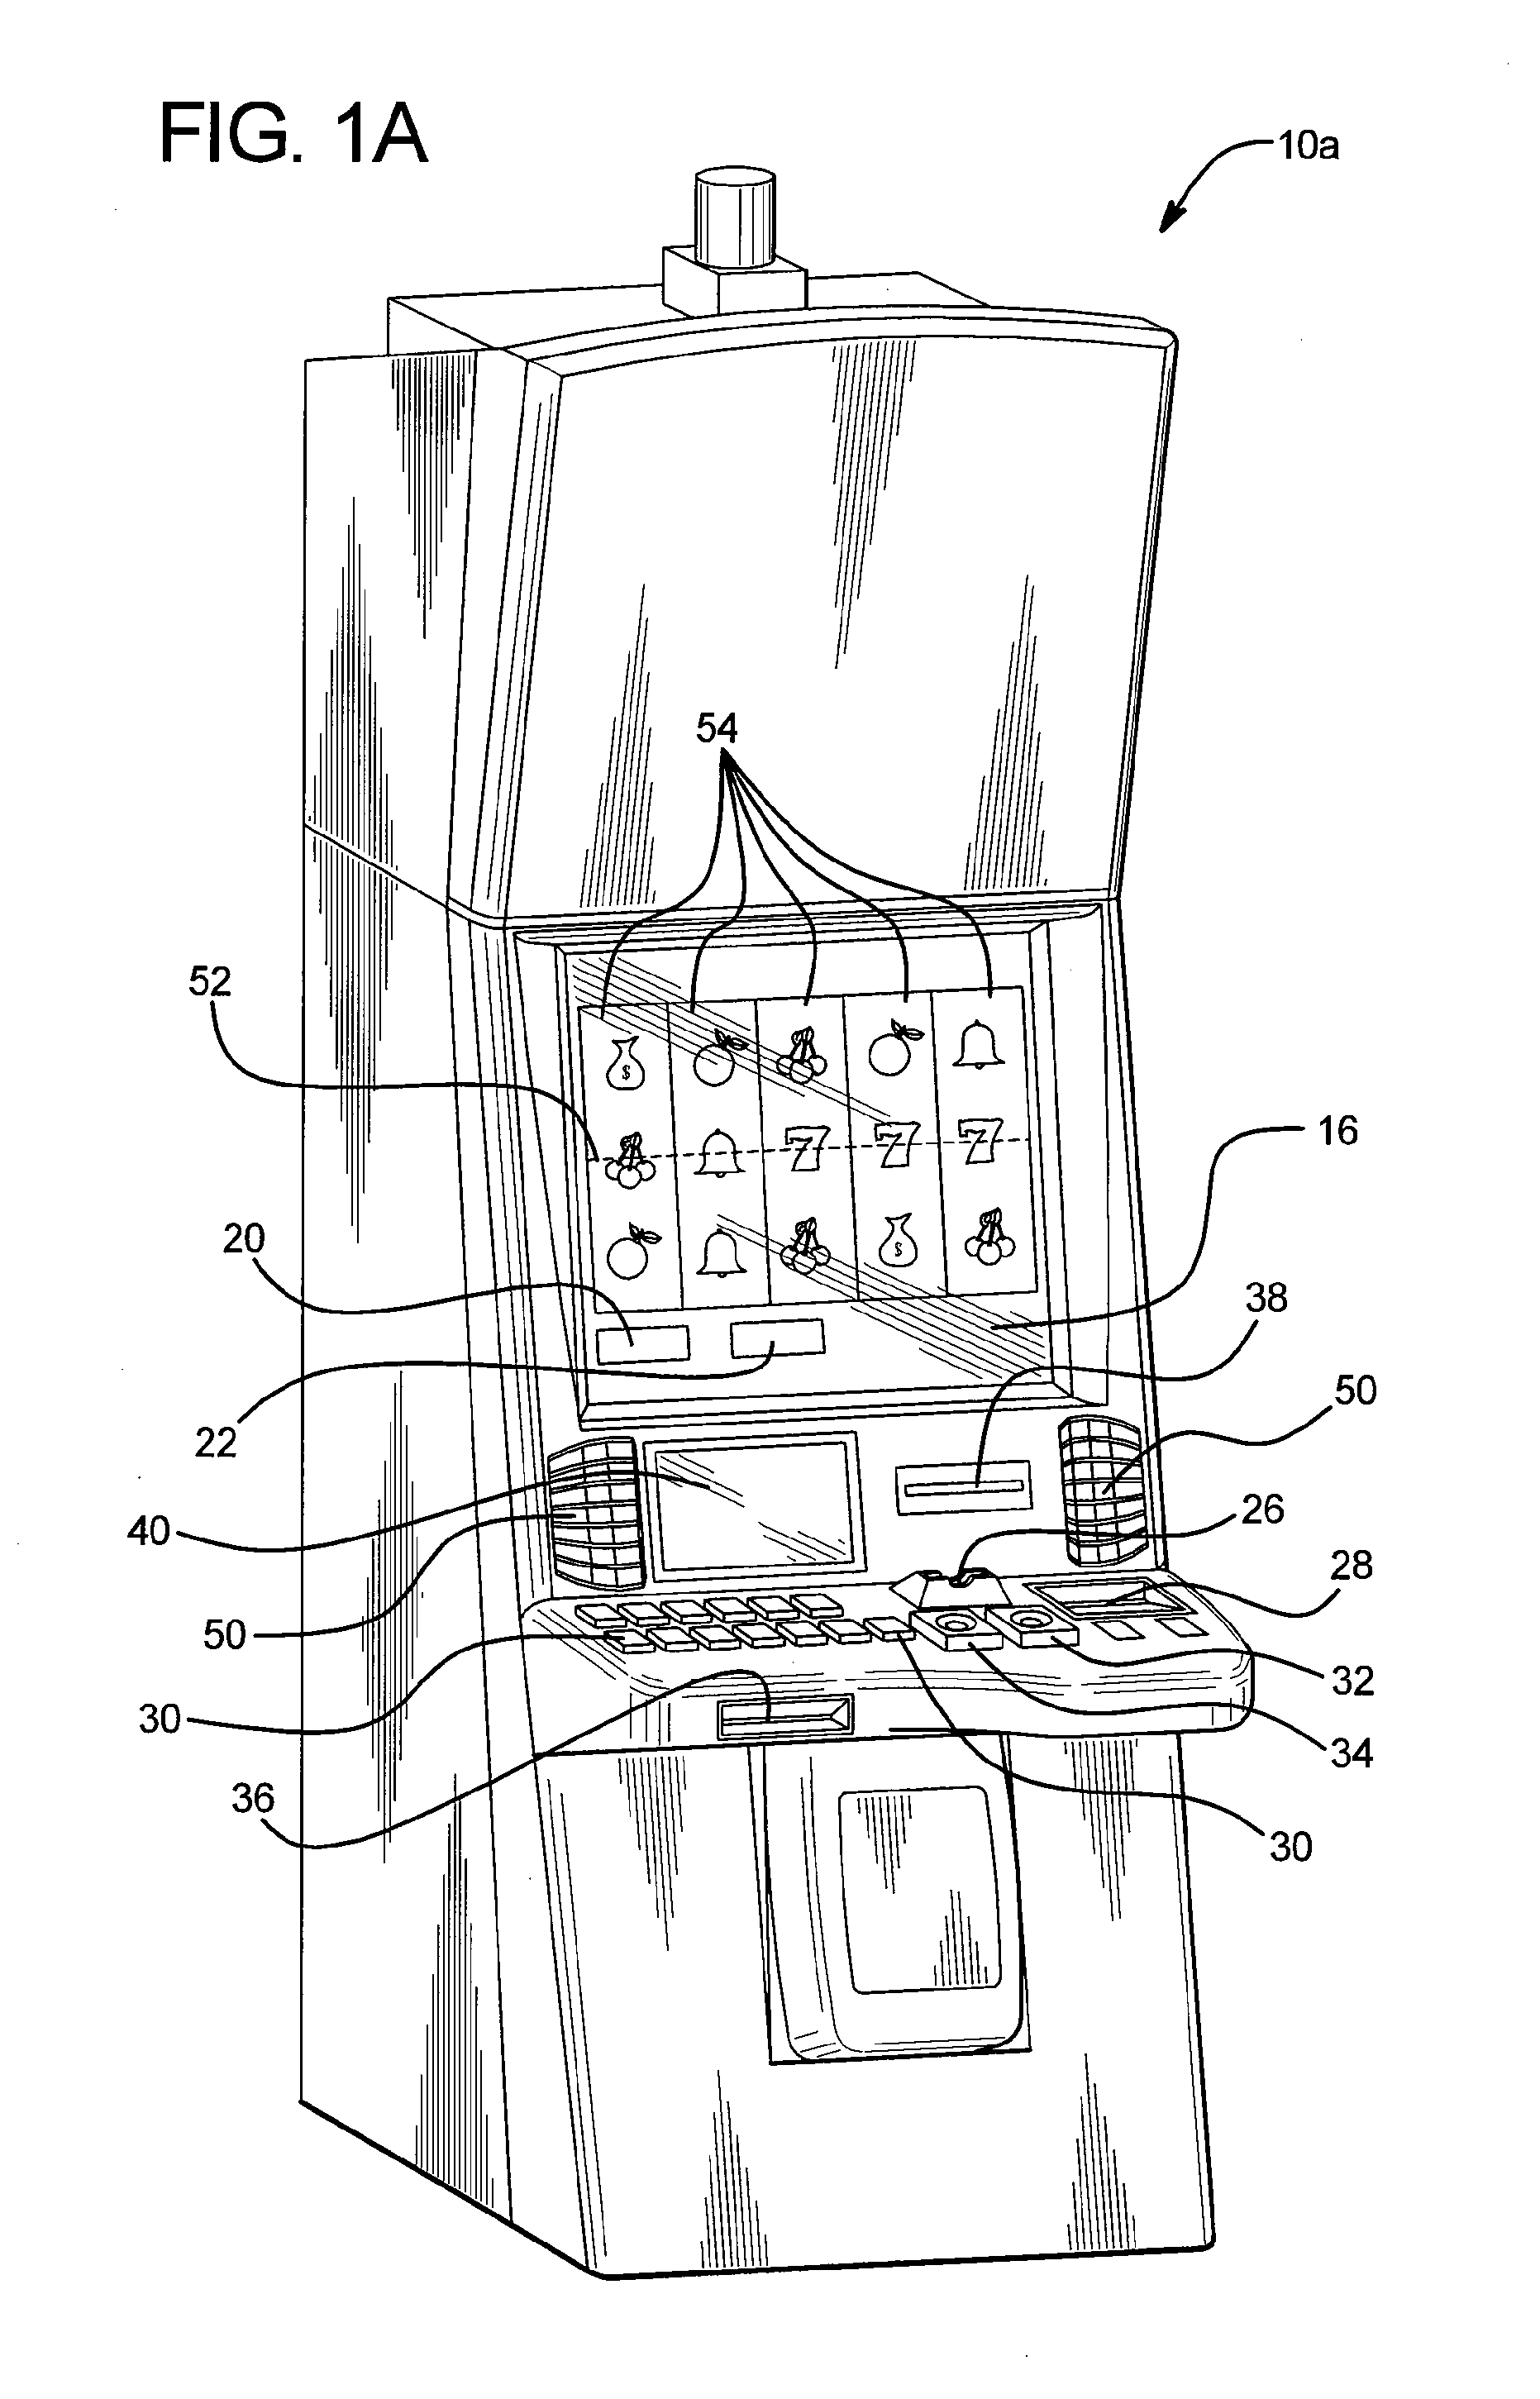 Gaming system and method for providing an additional gaming currency